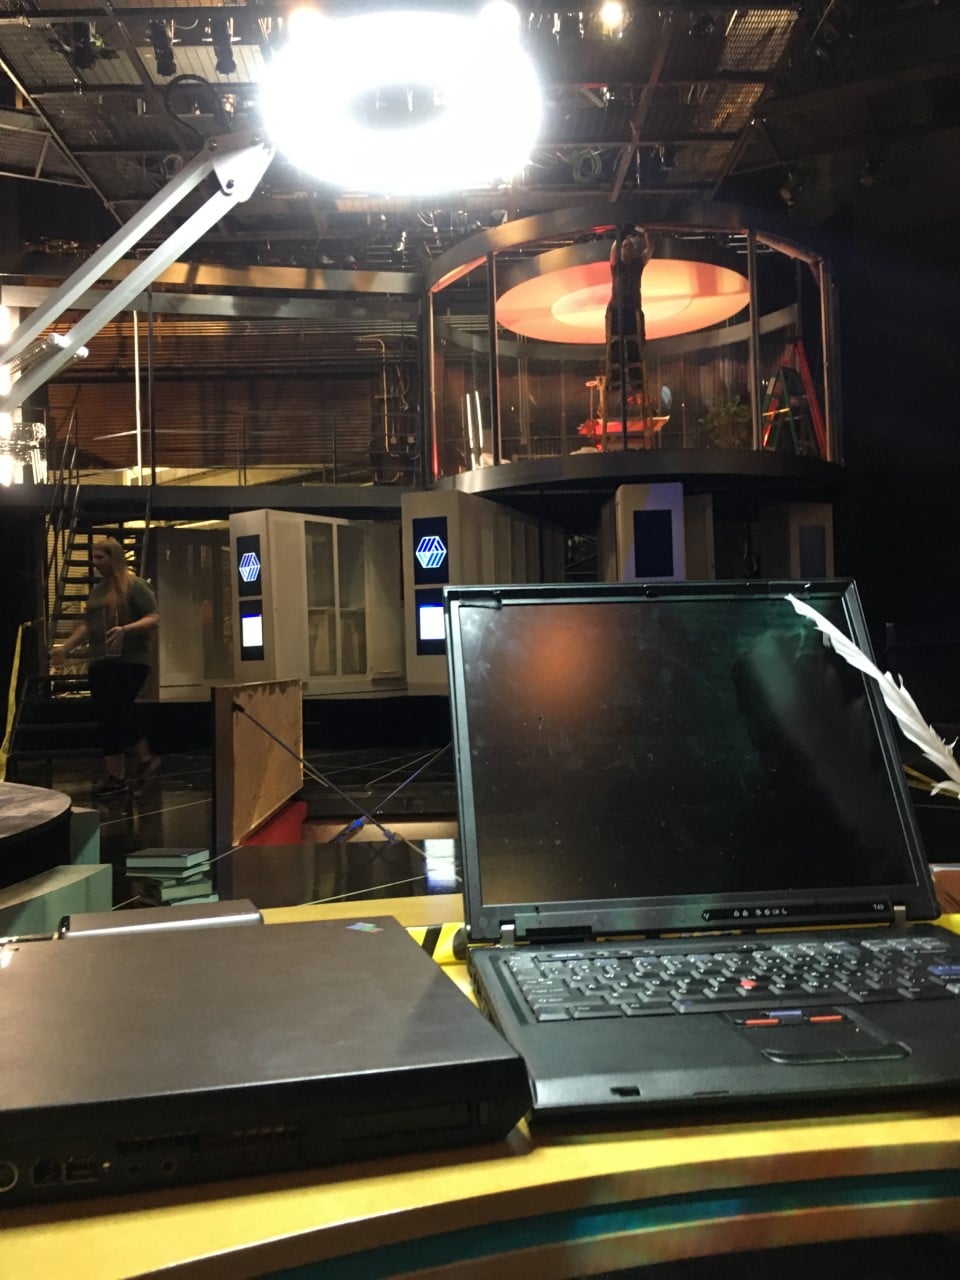 One of the desks featured in 'Life of Galileo' waits downstage for placement while our tech crew readies other scenic elements for the evening's tech rehearsal.